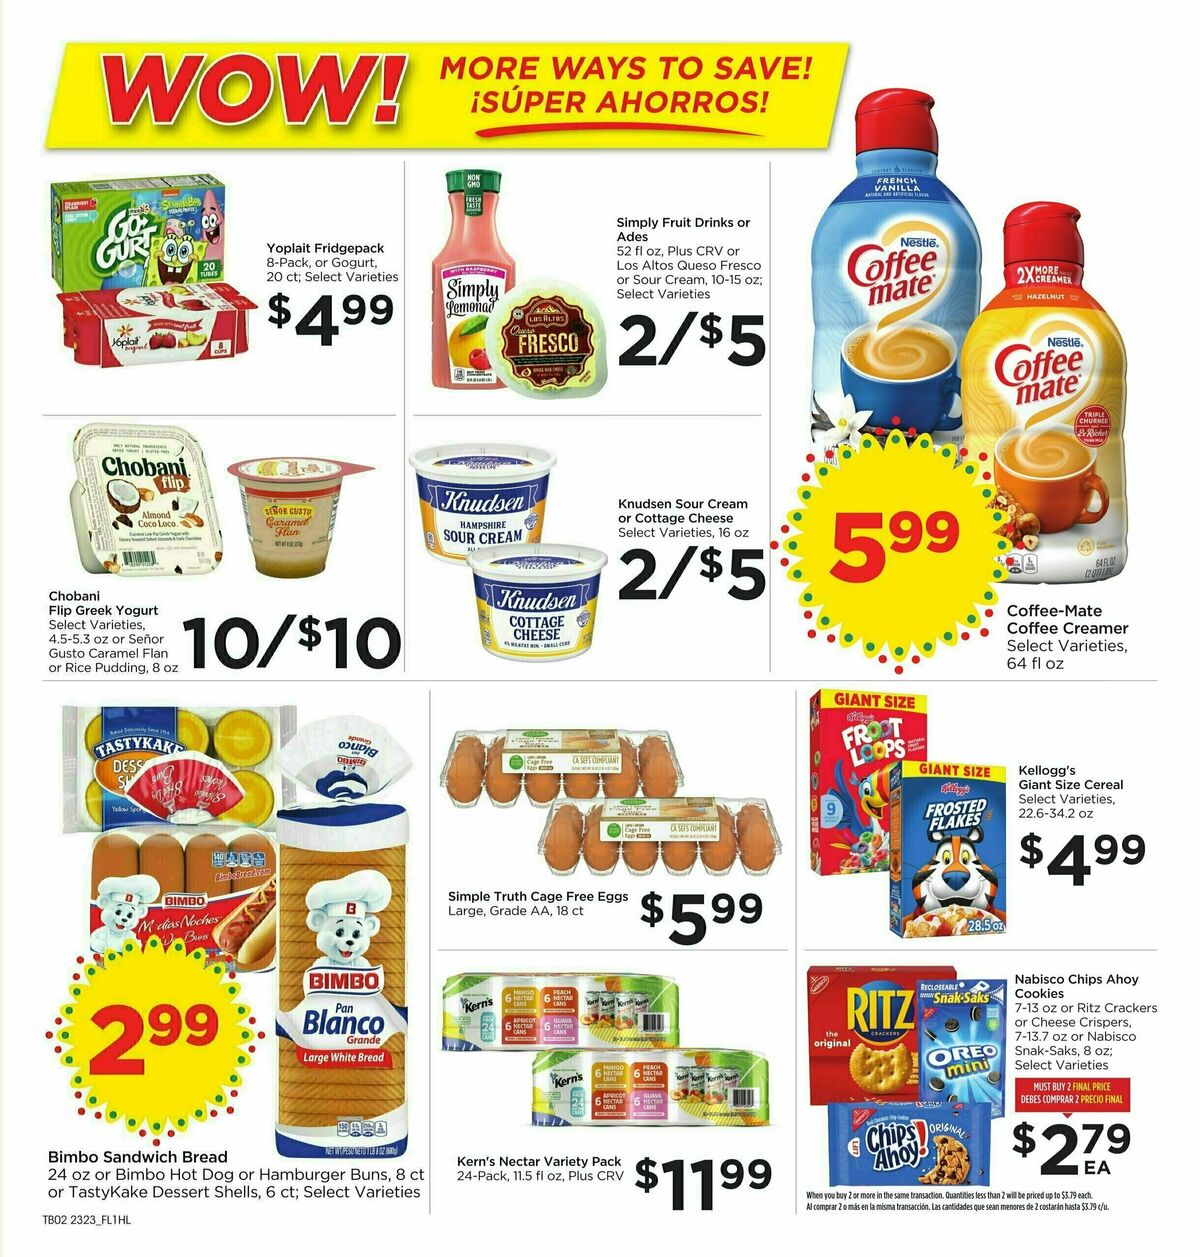 Food 4 Less Weekly Ad from July 5